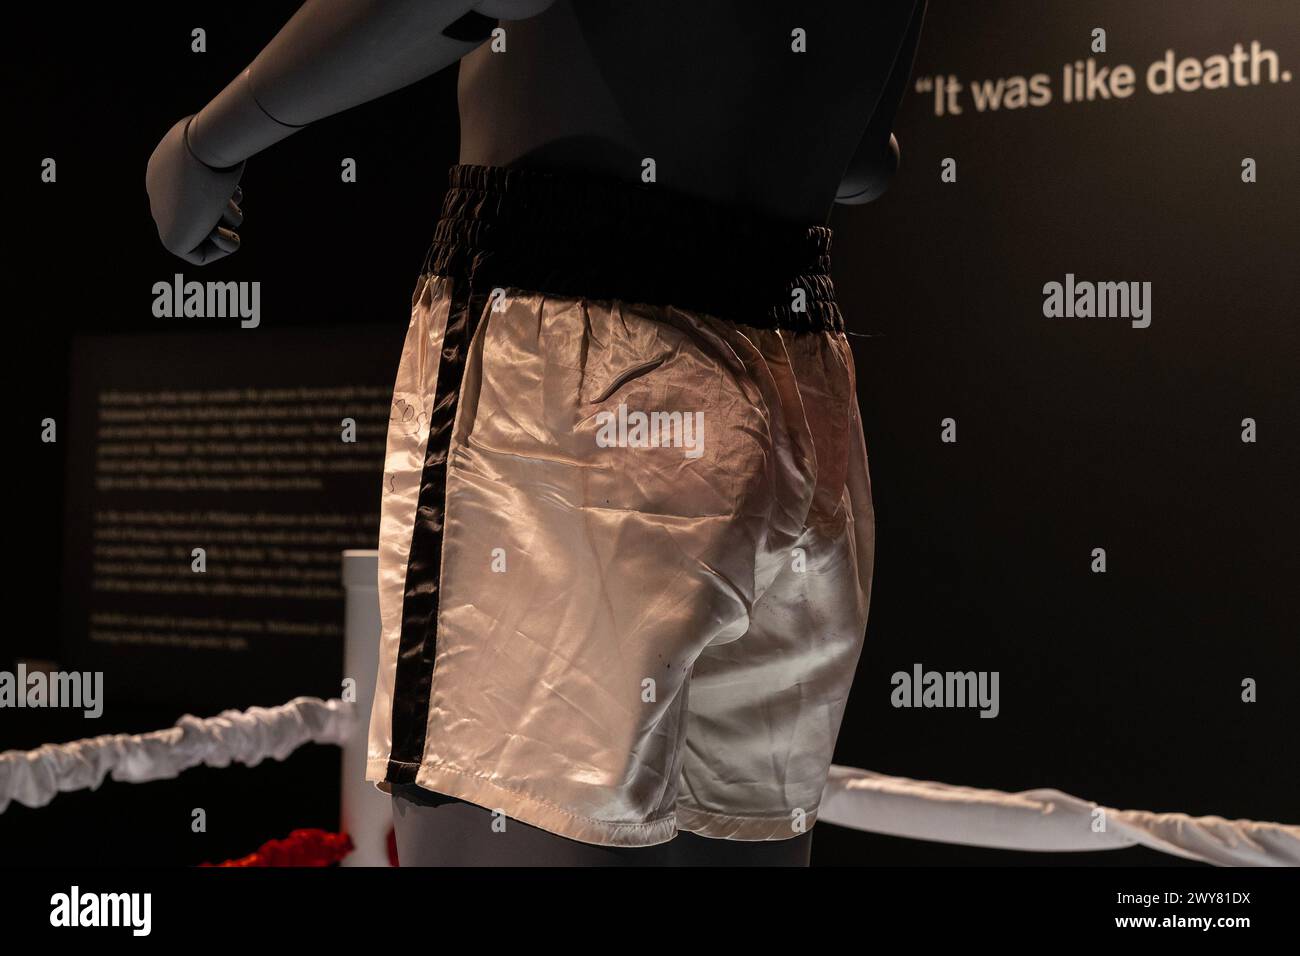 Muhammad Ali's fight worn Everlast trunks from The 'Thrilla in Manila' match with still visible reddish color from paint of the ring rope on display during press preview for the Sotheby's auctions of sport memorabilia in New York on April 4, 2024. Auctions will take place online and live in person on April 11, 2024. Some highlights include Muhammad Ali worn trunk from The 'Thrilla in Manila', Kobe Bryant worn jersey from 2009 NBA Finals, Michael Jordan Air Jordan 11s from 1996 NBA Finals, as well as memorabilia from NBA All-Star 2024 and collection of sneakers worn by NBA greatest players. (P Stock Photo